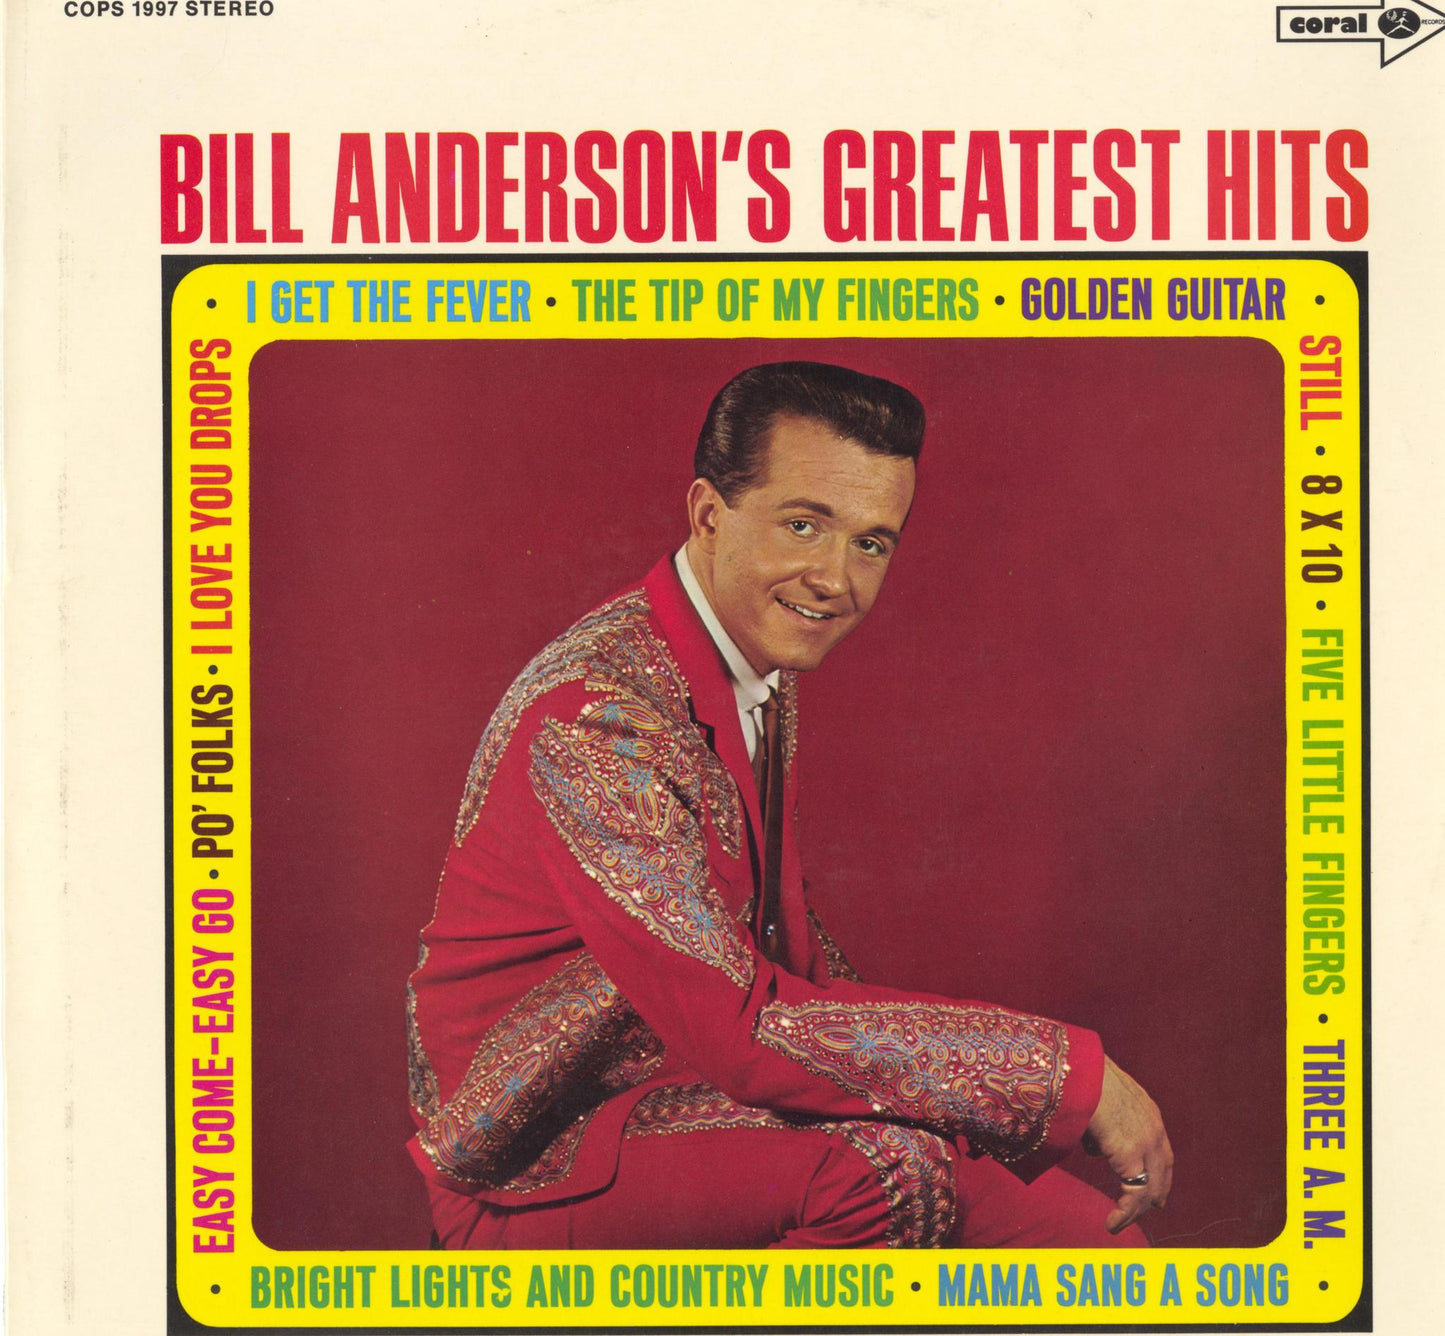 Bill Anderson's Greatest Hits